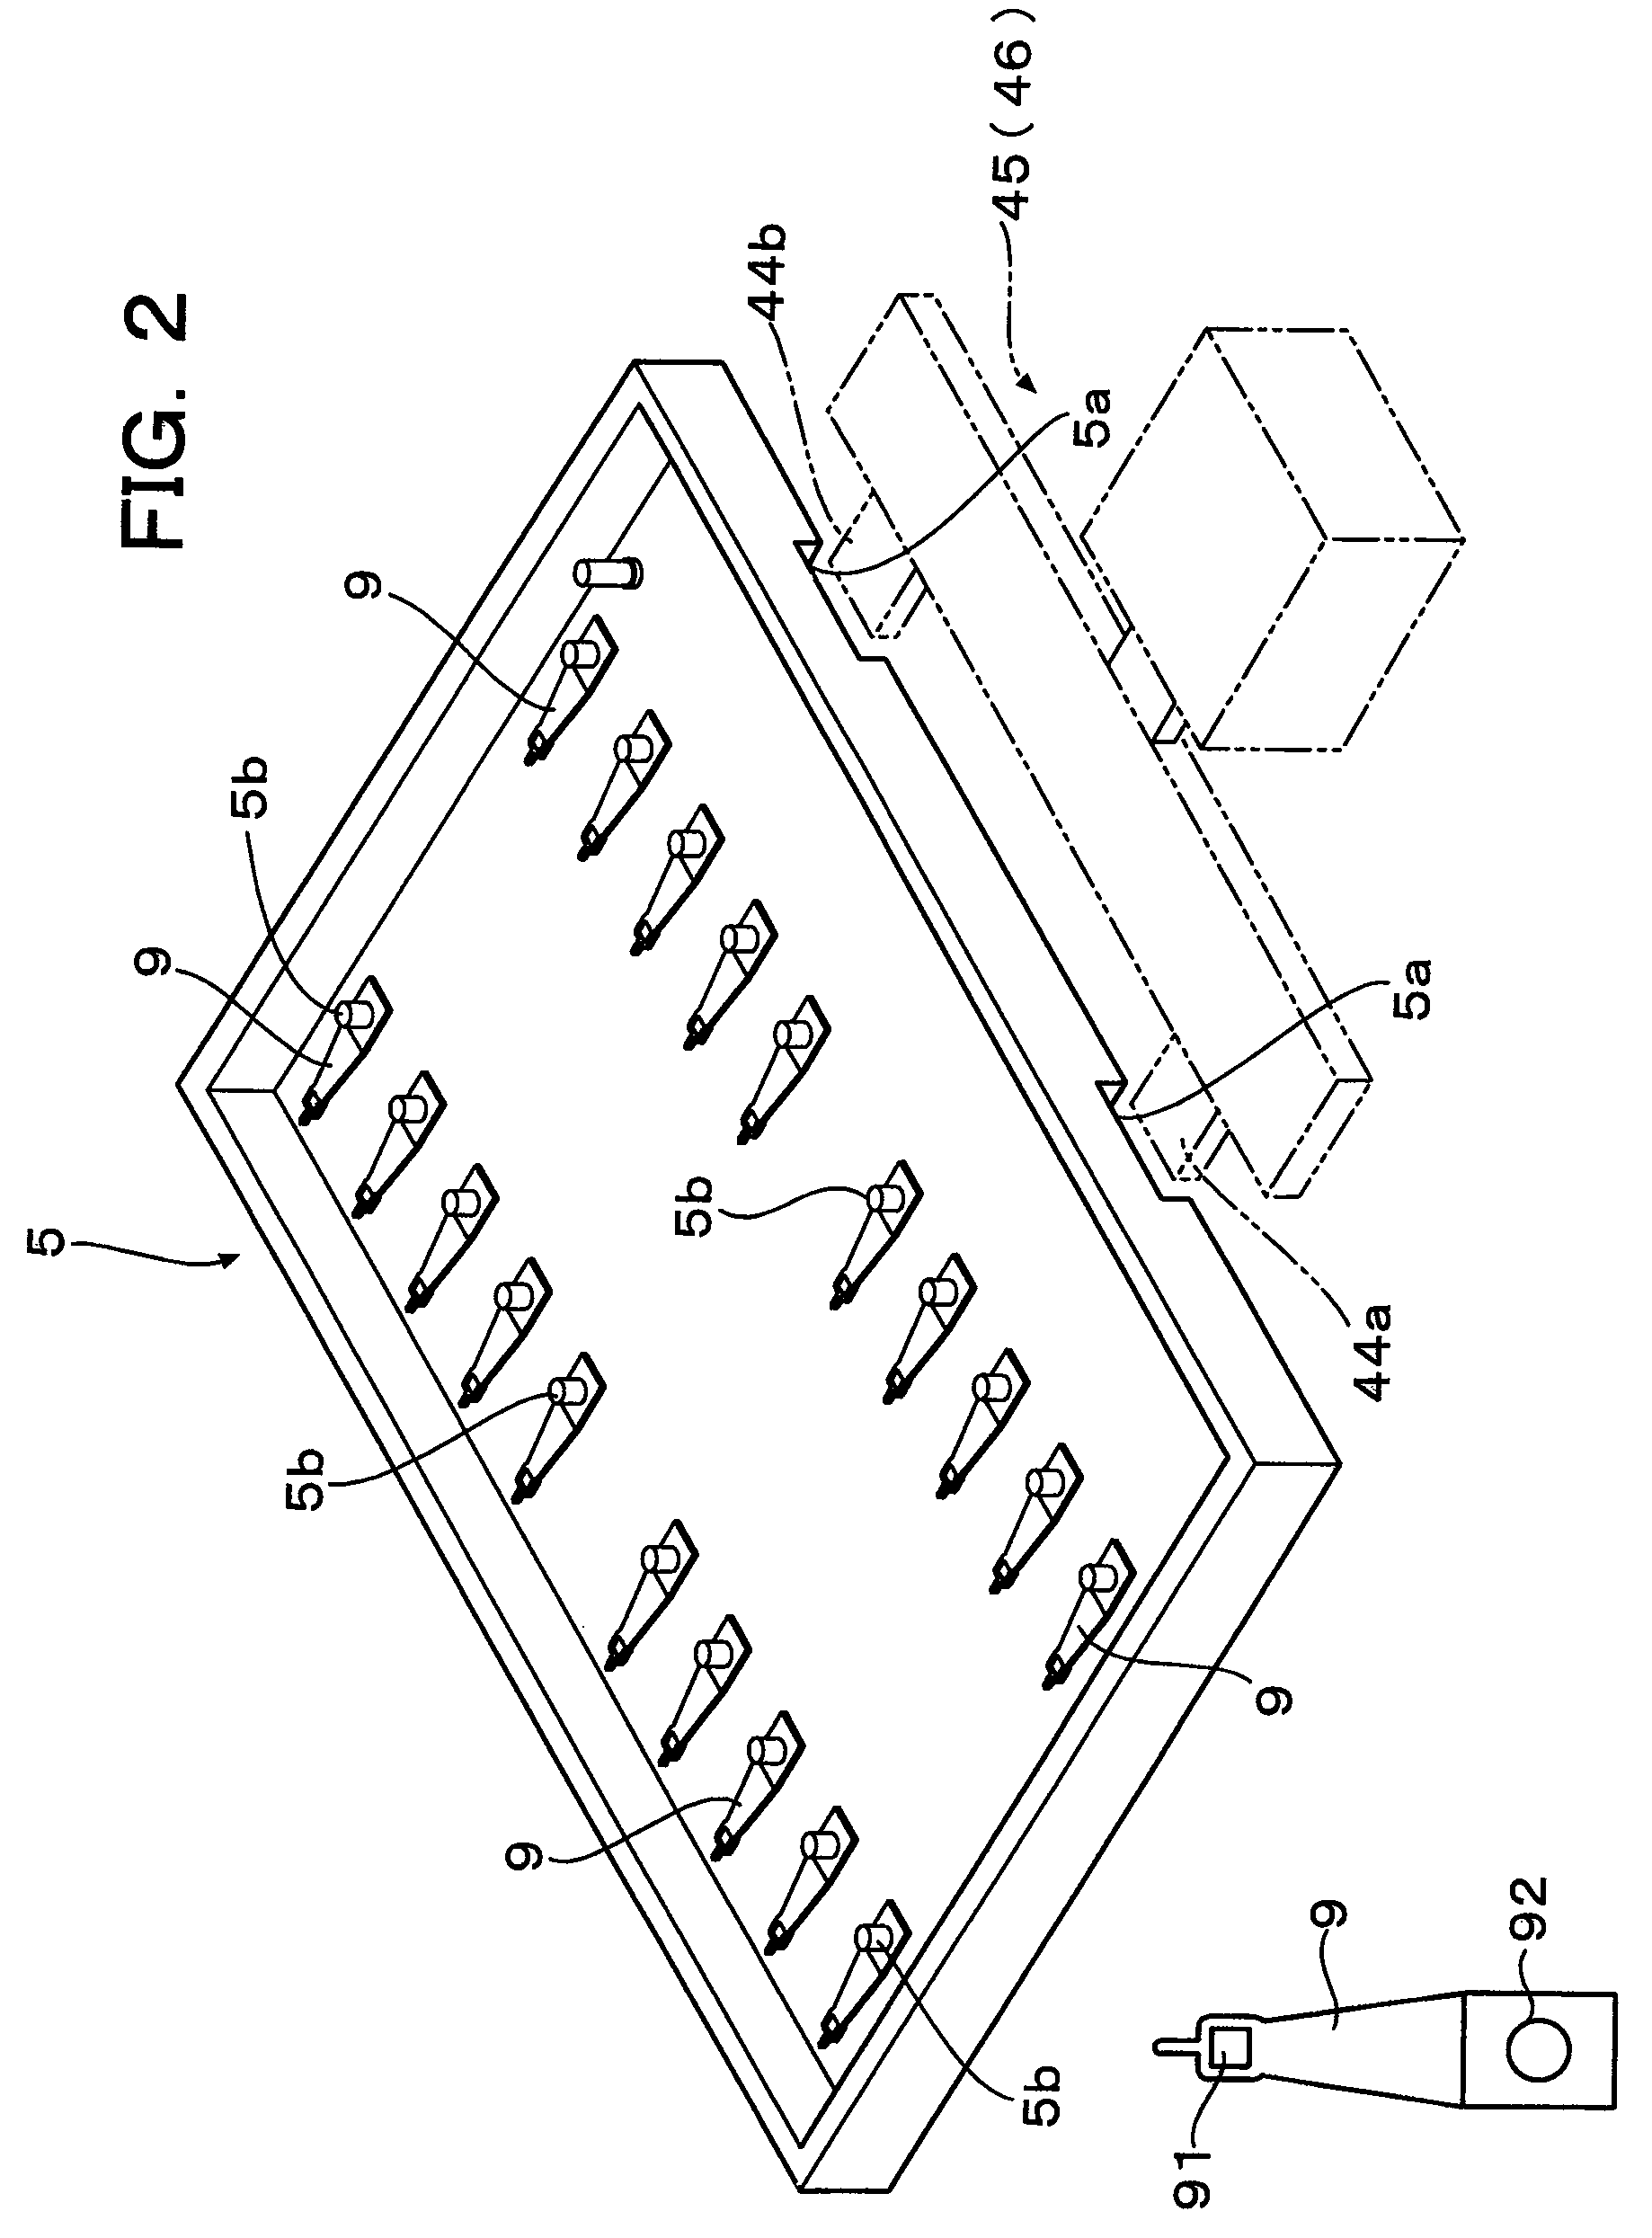 Handling mechanism of trays with which electronic parts are fed and inspection device of the electronic parts using the mechanism